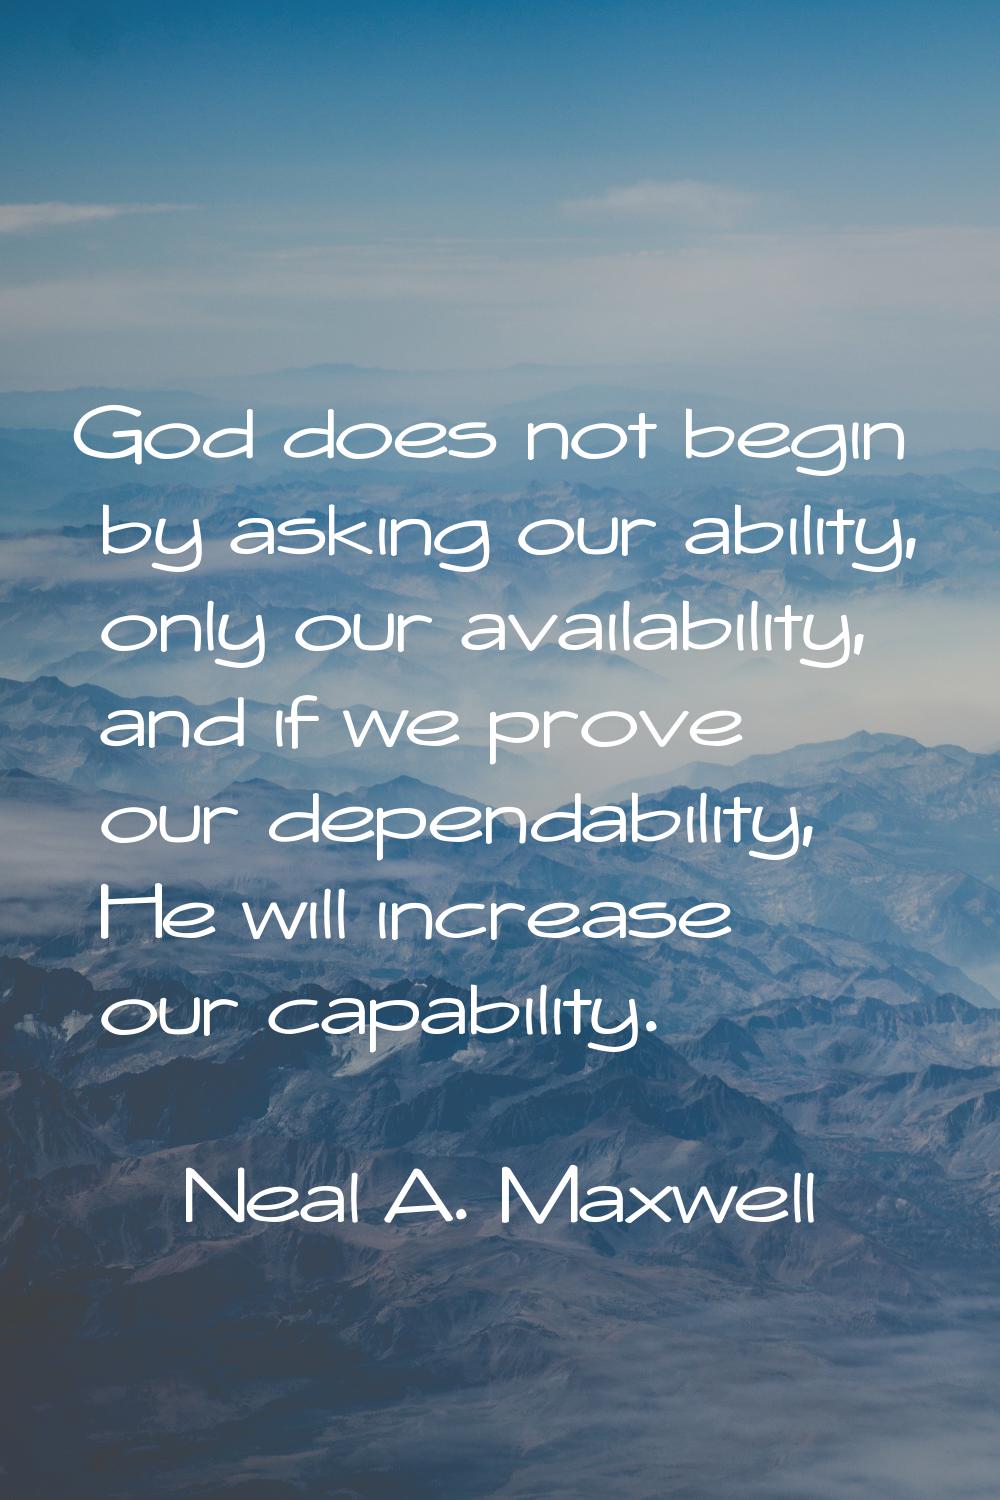 God does not begin by asking our ability, only our availability, and if we prove our dependability,